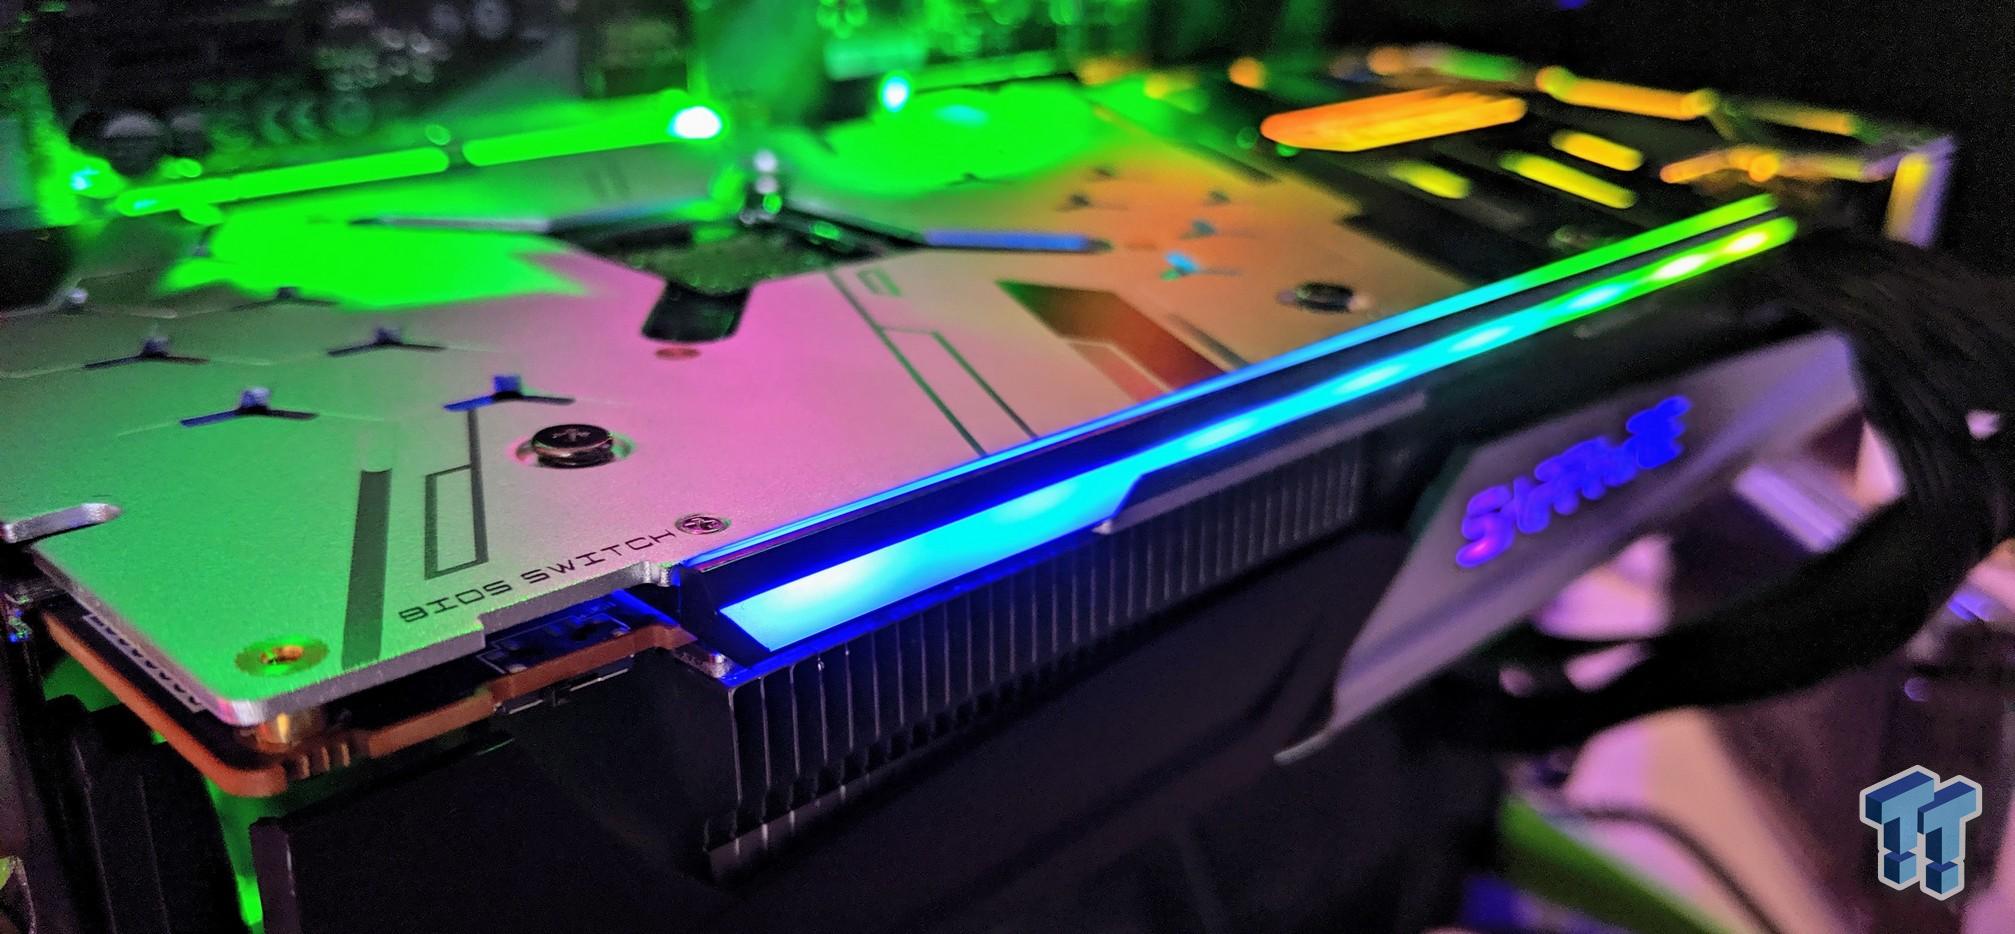 Sapphire Nitro+ Radeon RX 5700 XT review: Superfast and nearly flawless